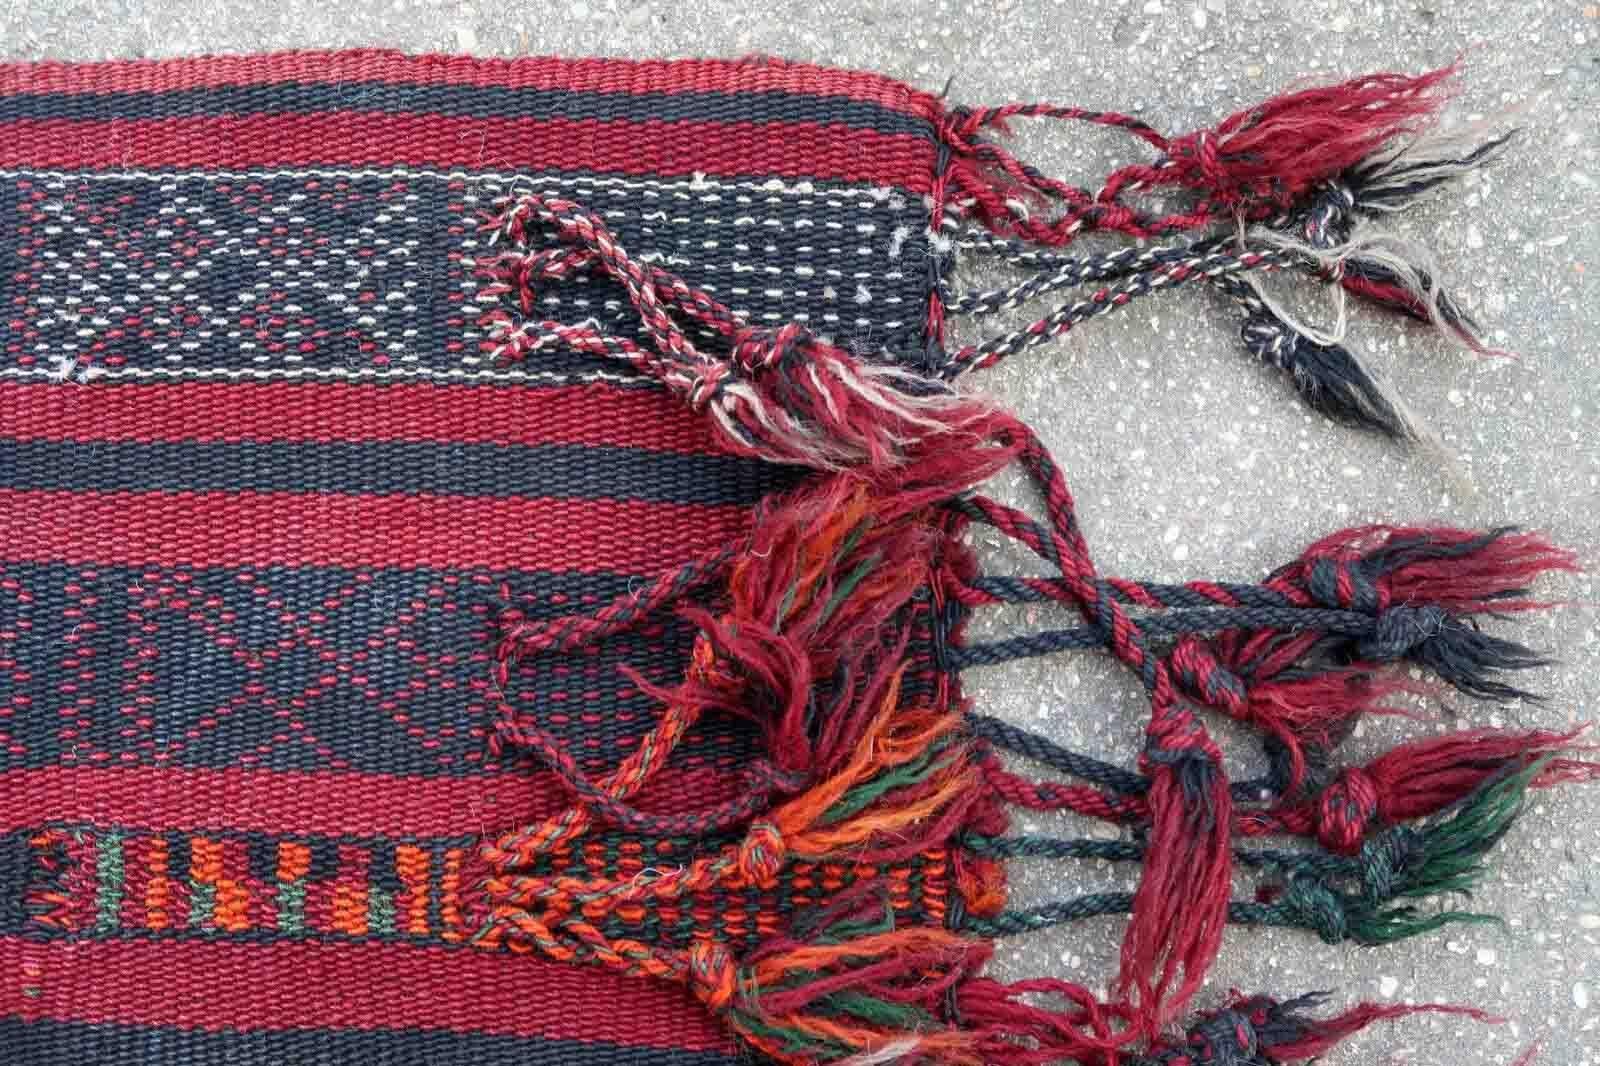 Handmade antique Tunisian Berber kilim band in stripes. This flatweave has been made in the beginning of 20rh century, it is in original good condition.

-condition: original good,

-circa: 1900s,

-size: 1.8' x 6.2' (55cm x